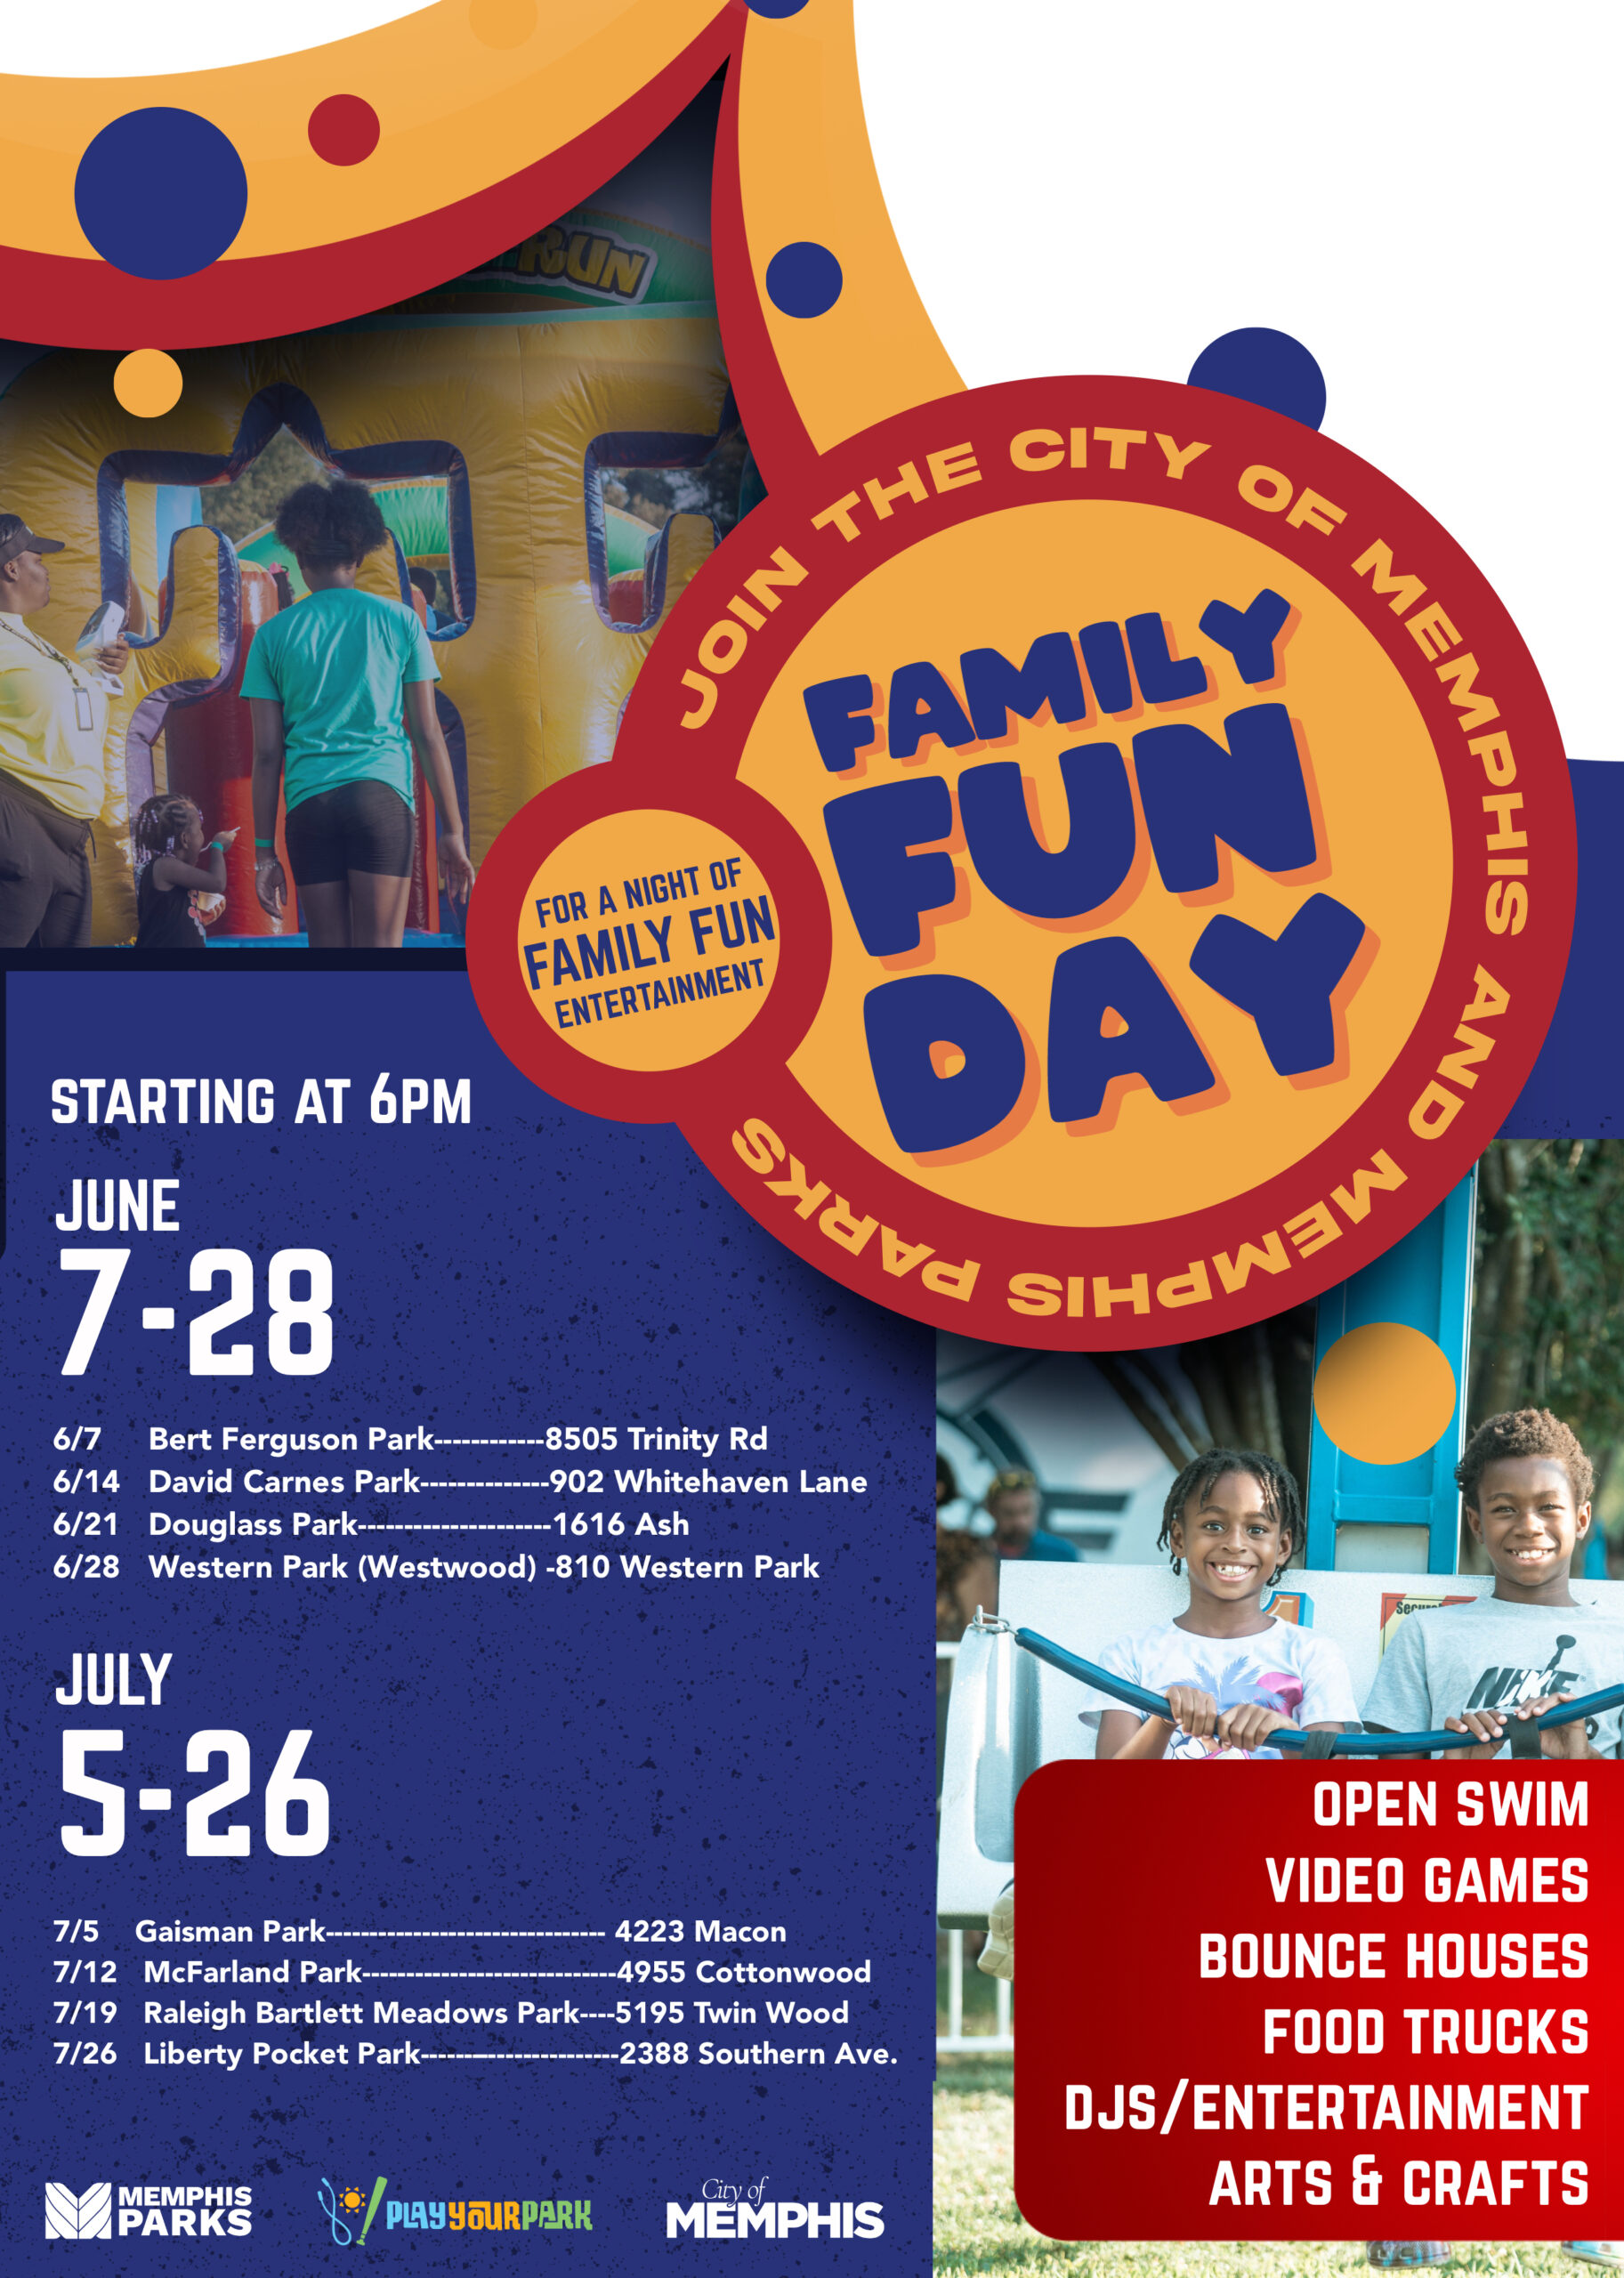 Join the City of Memphis and Memphis Parks for a Family Fun Day